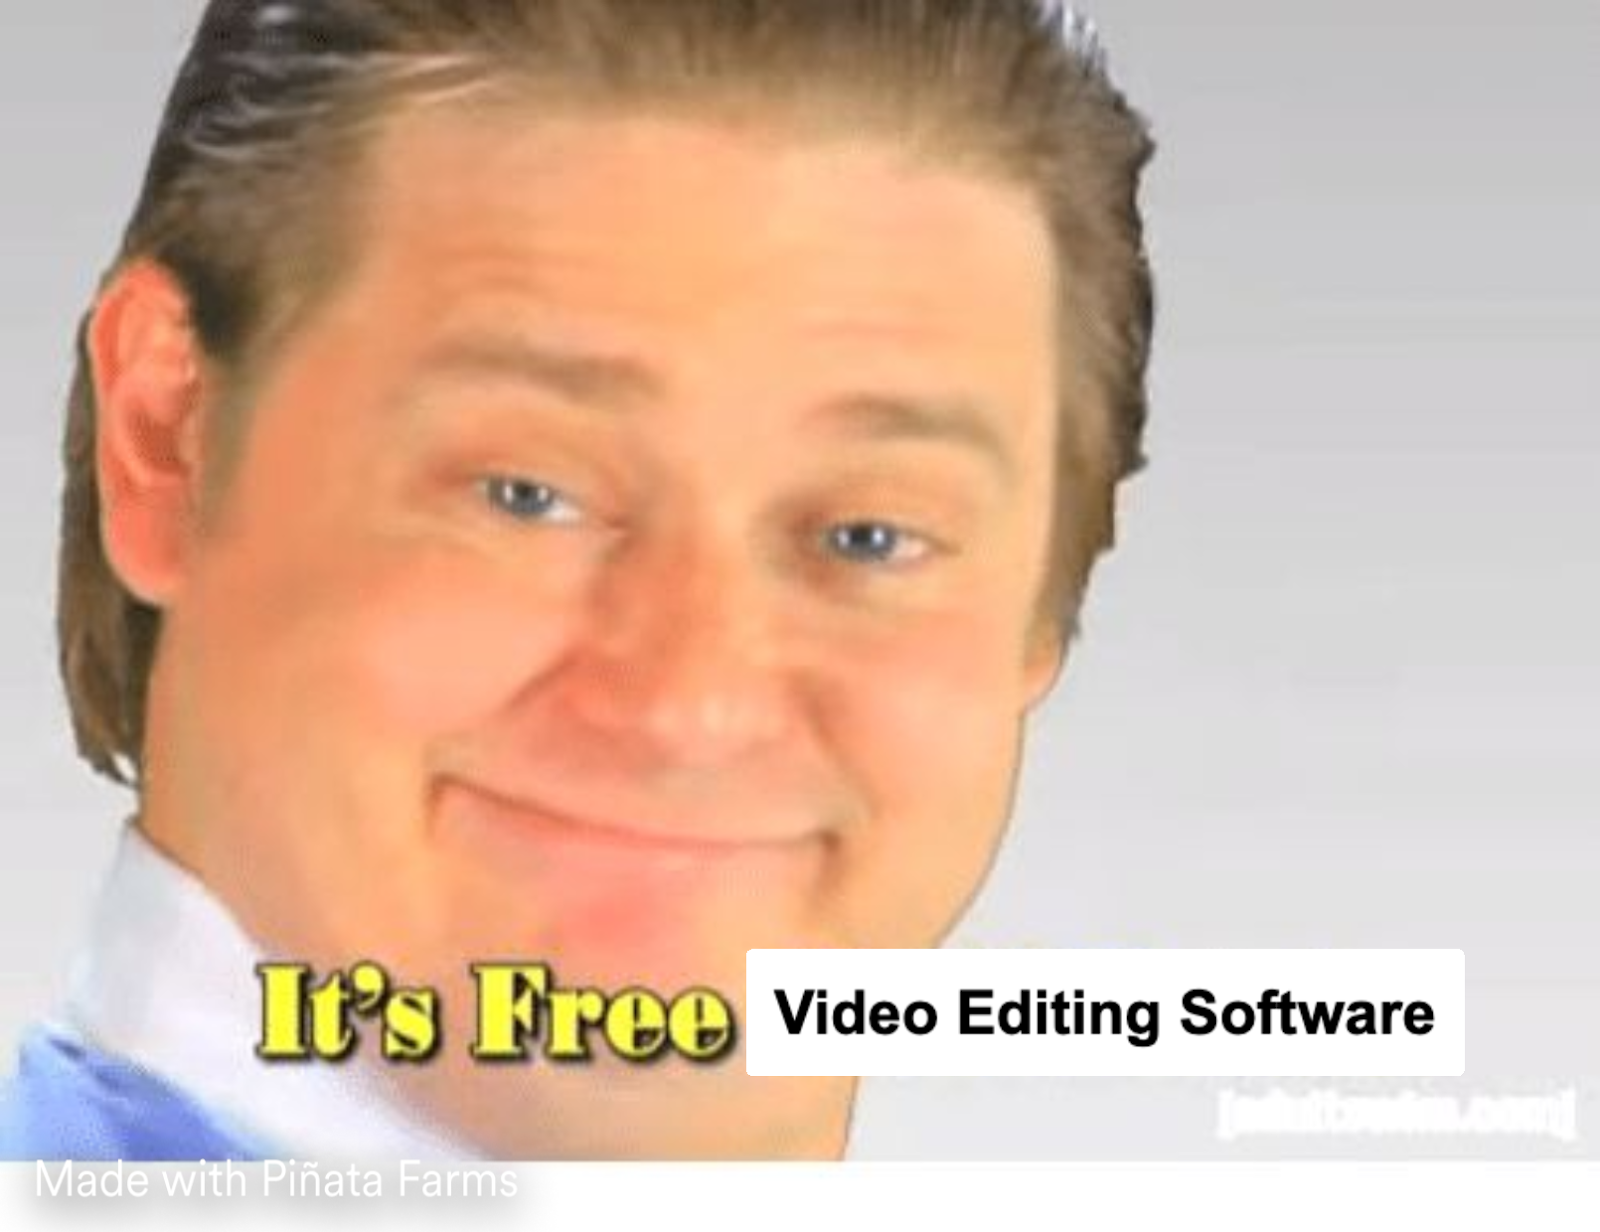 Capcut tutorial for this free editing software